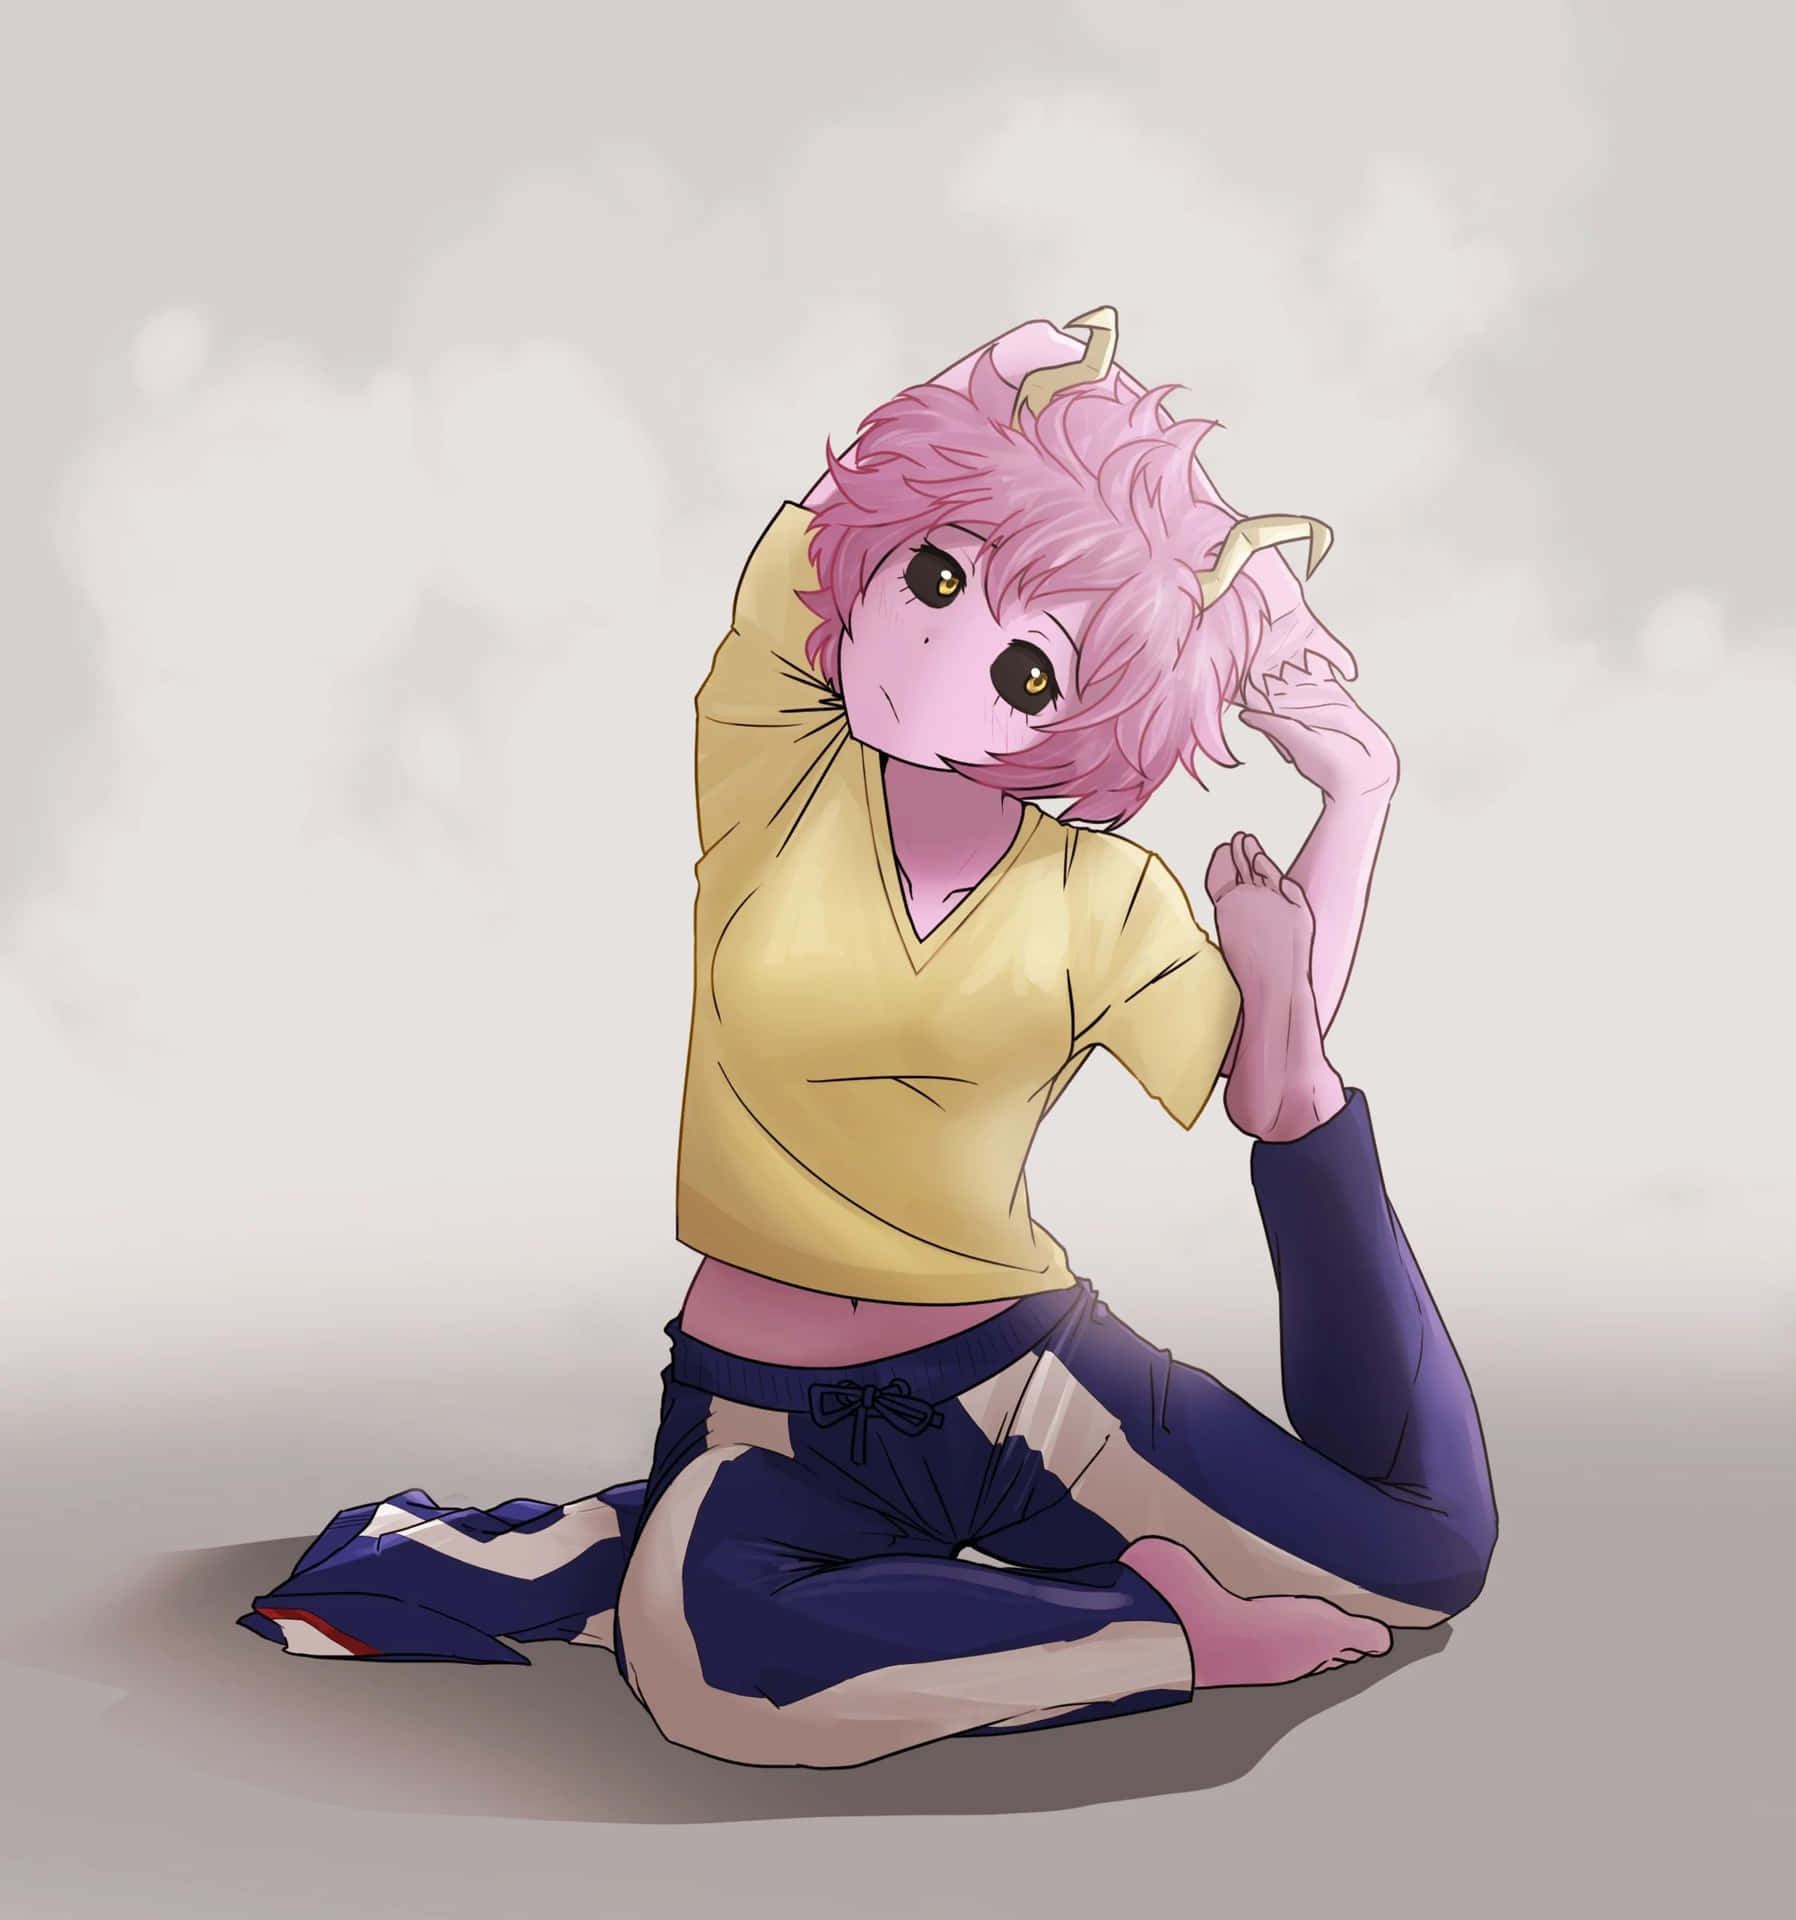 A Girl With Pink Hair Is Sitting On The Ground Wallpaper